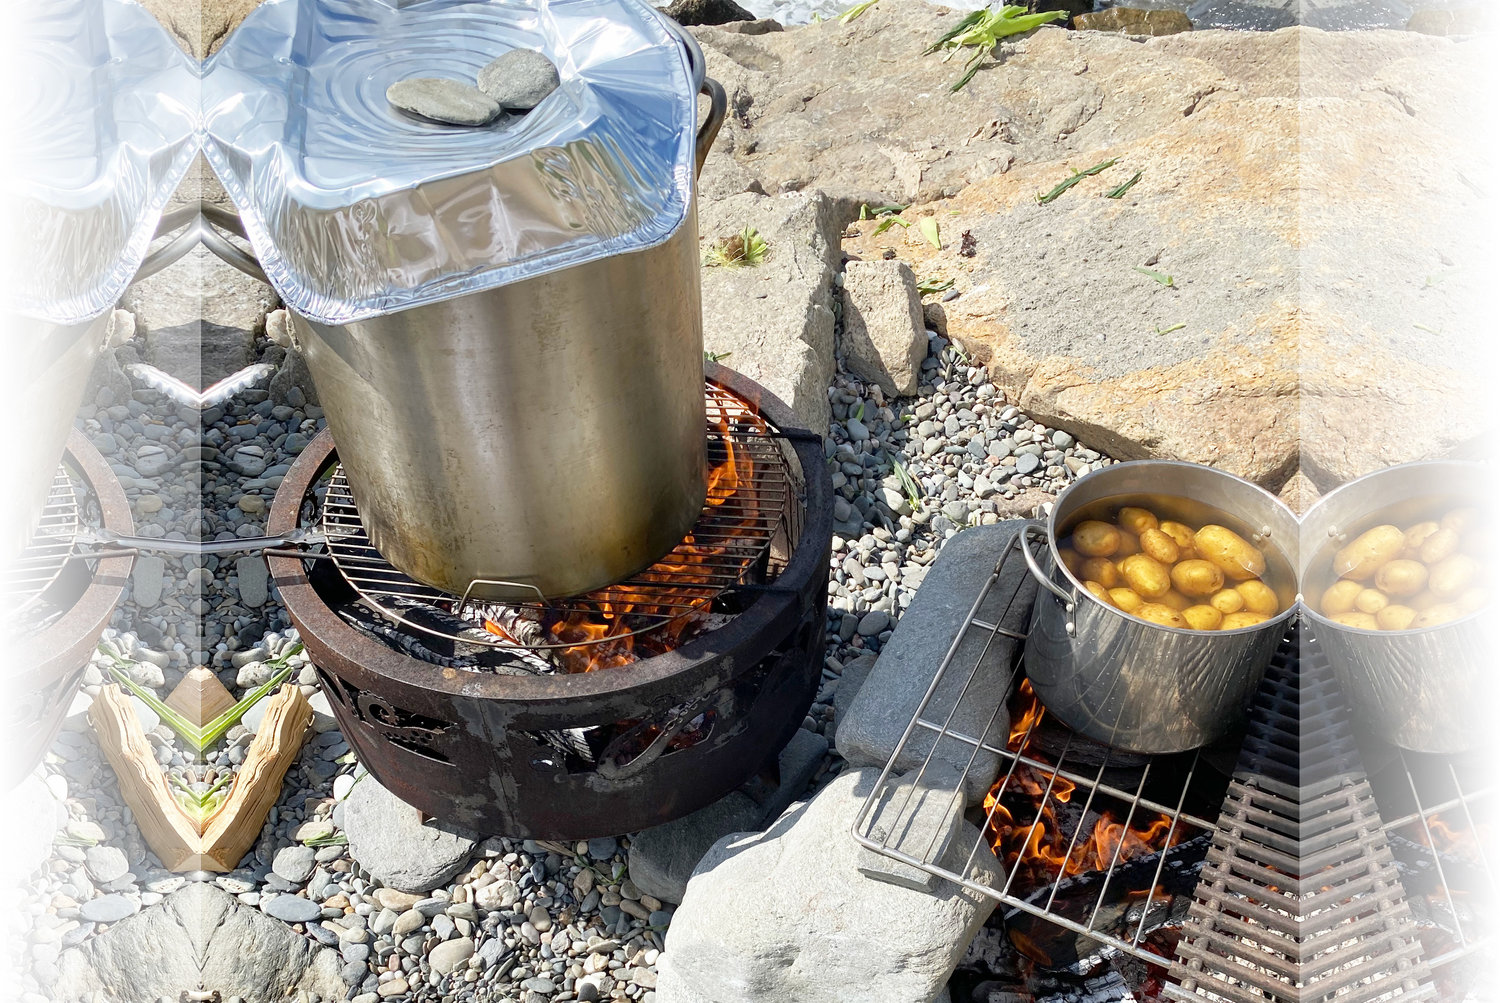 DeRego boiling potatoes in sea water at the beach